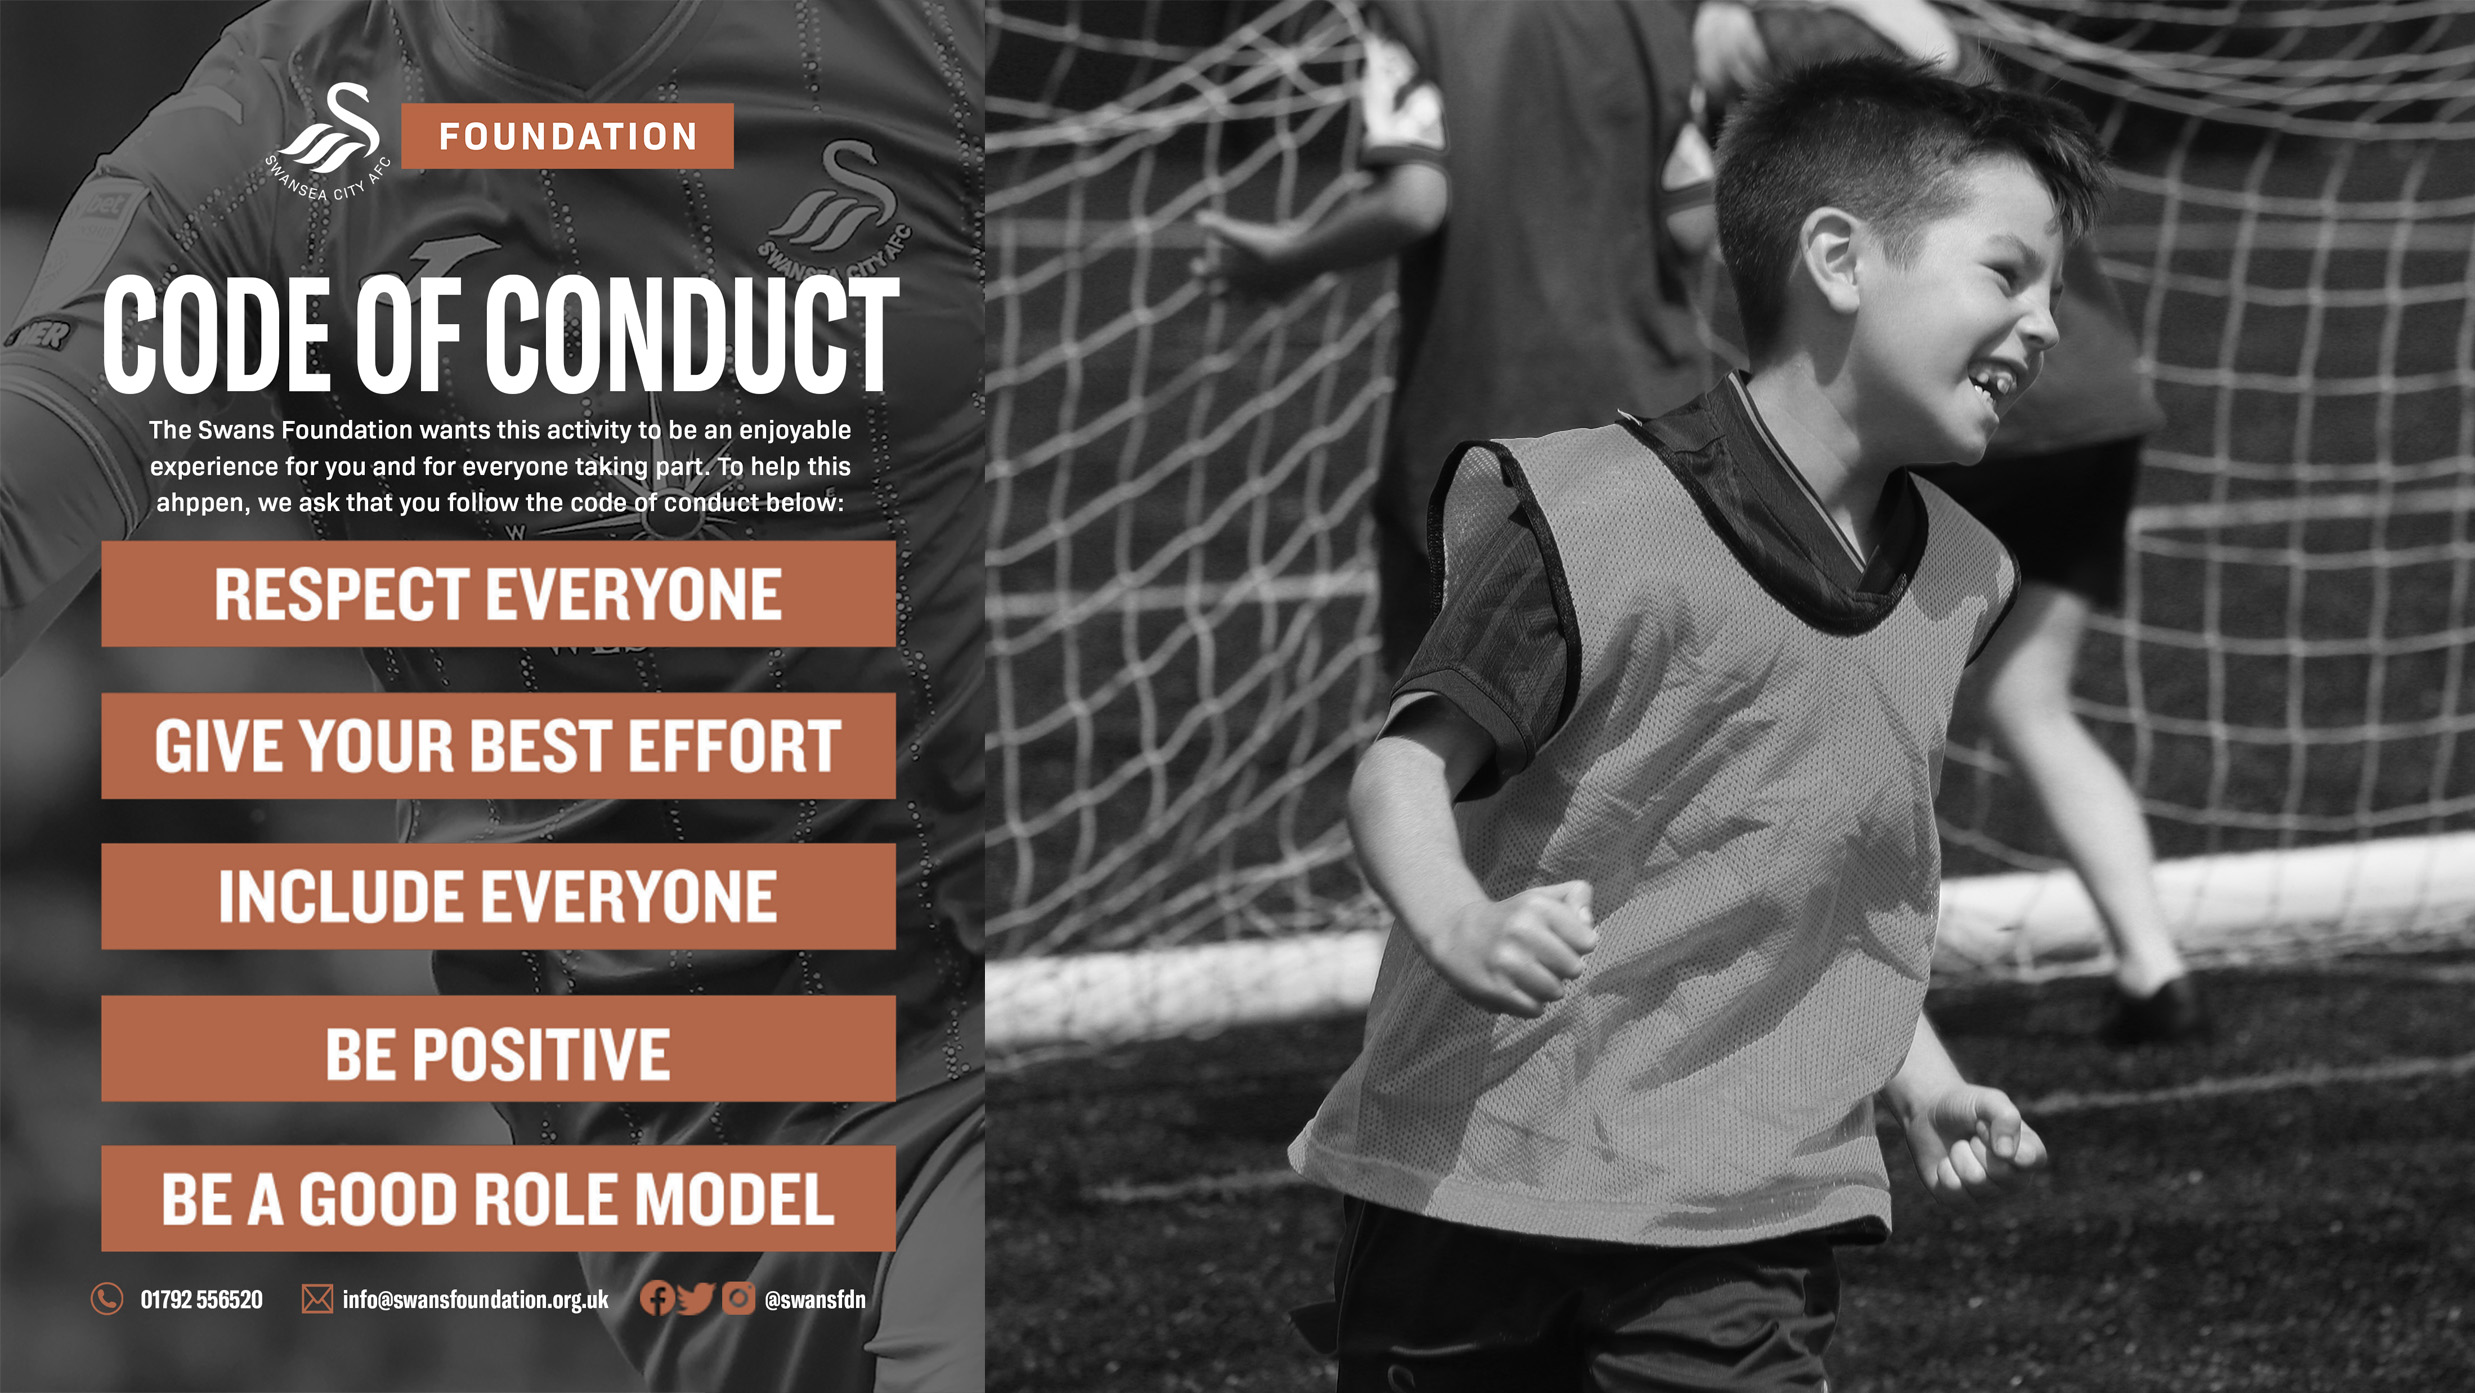 Foundation Code of Conduct 16x9